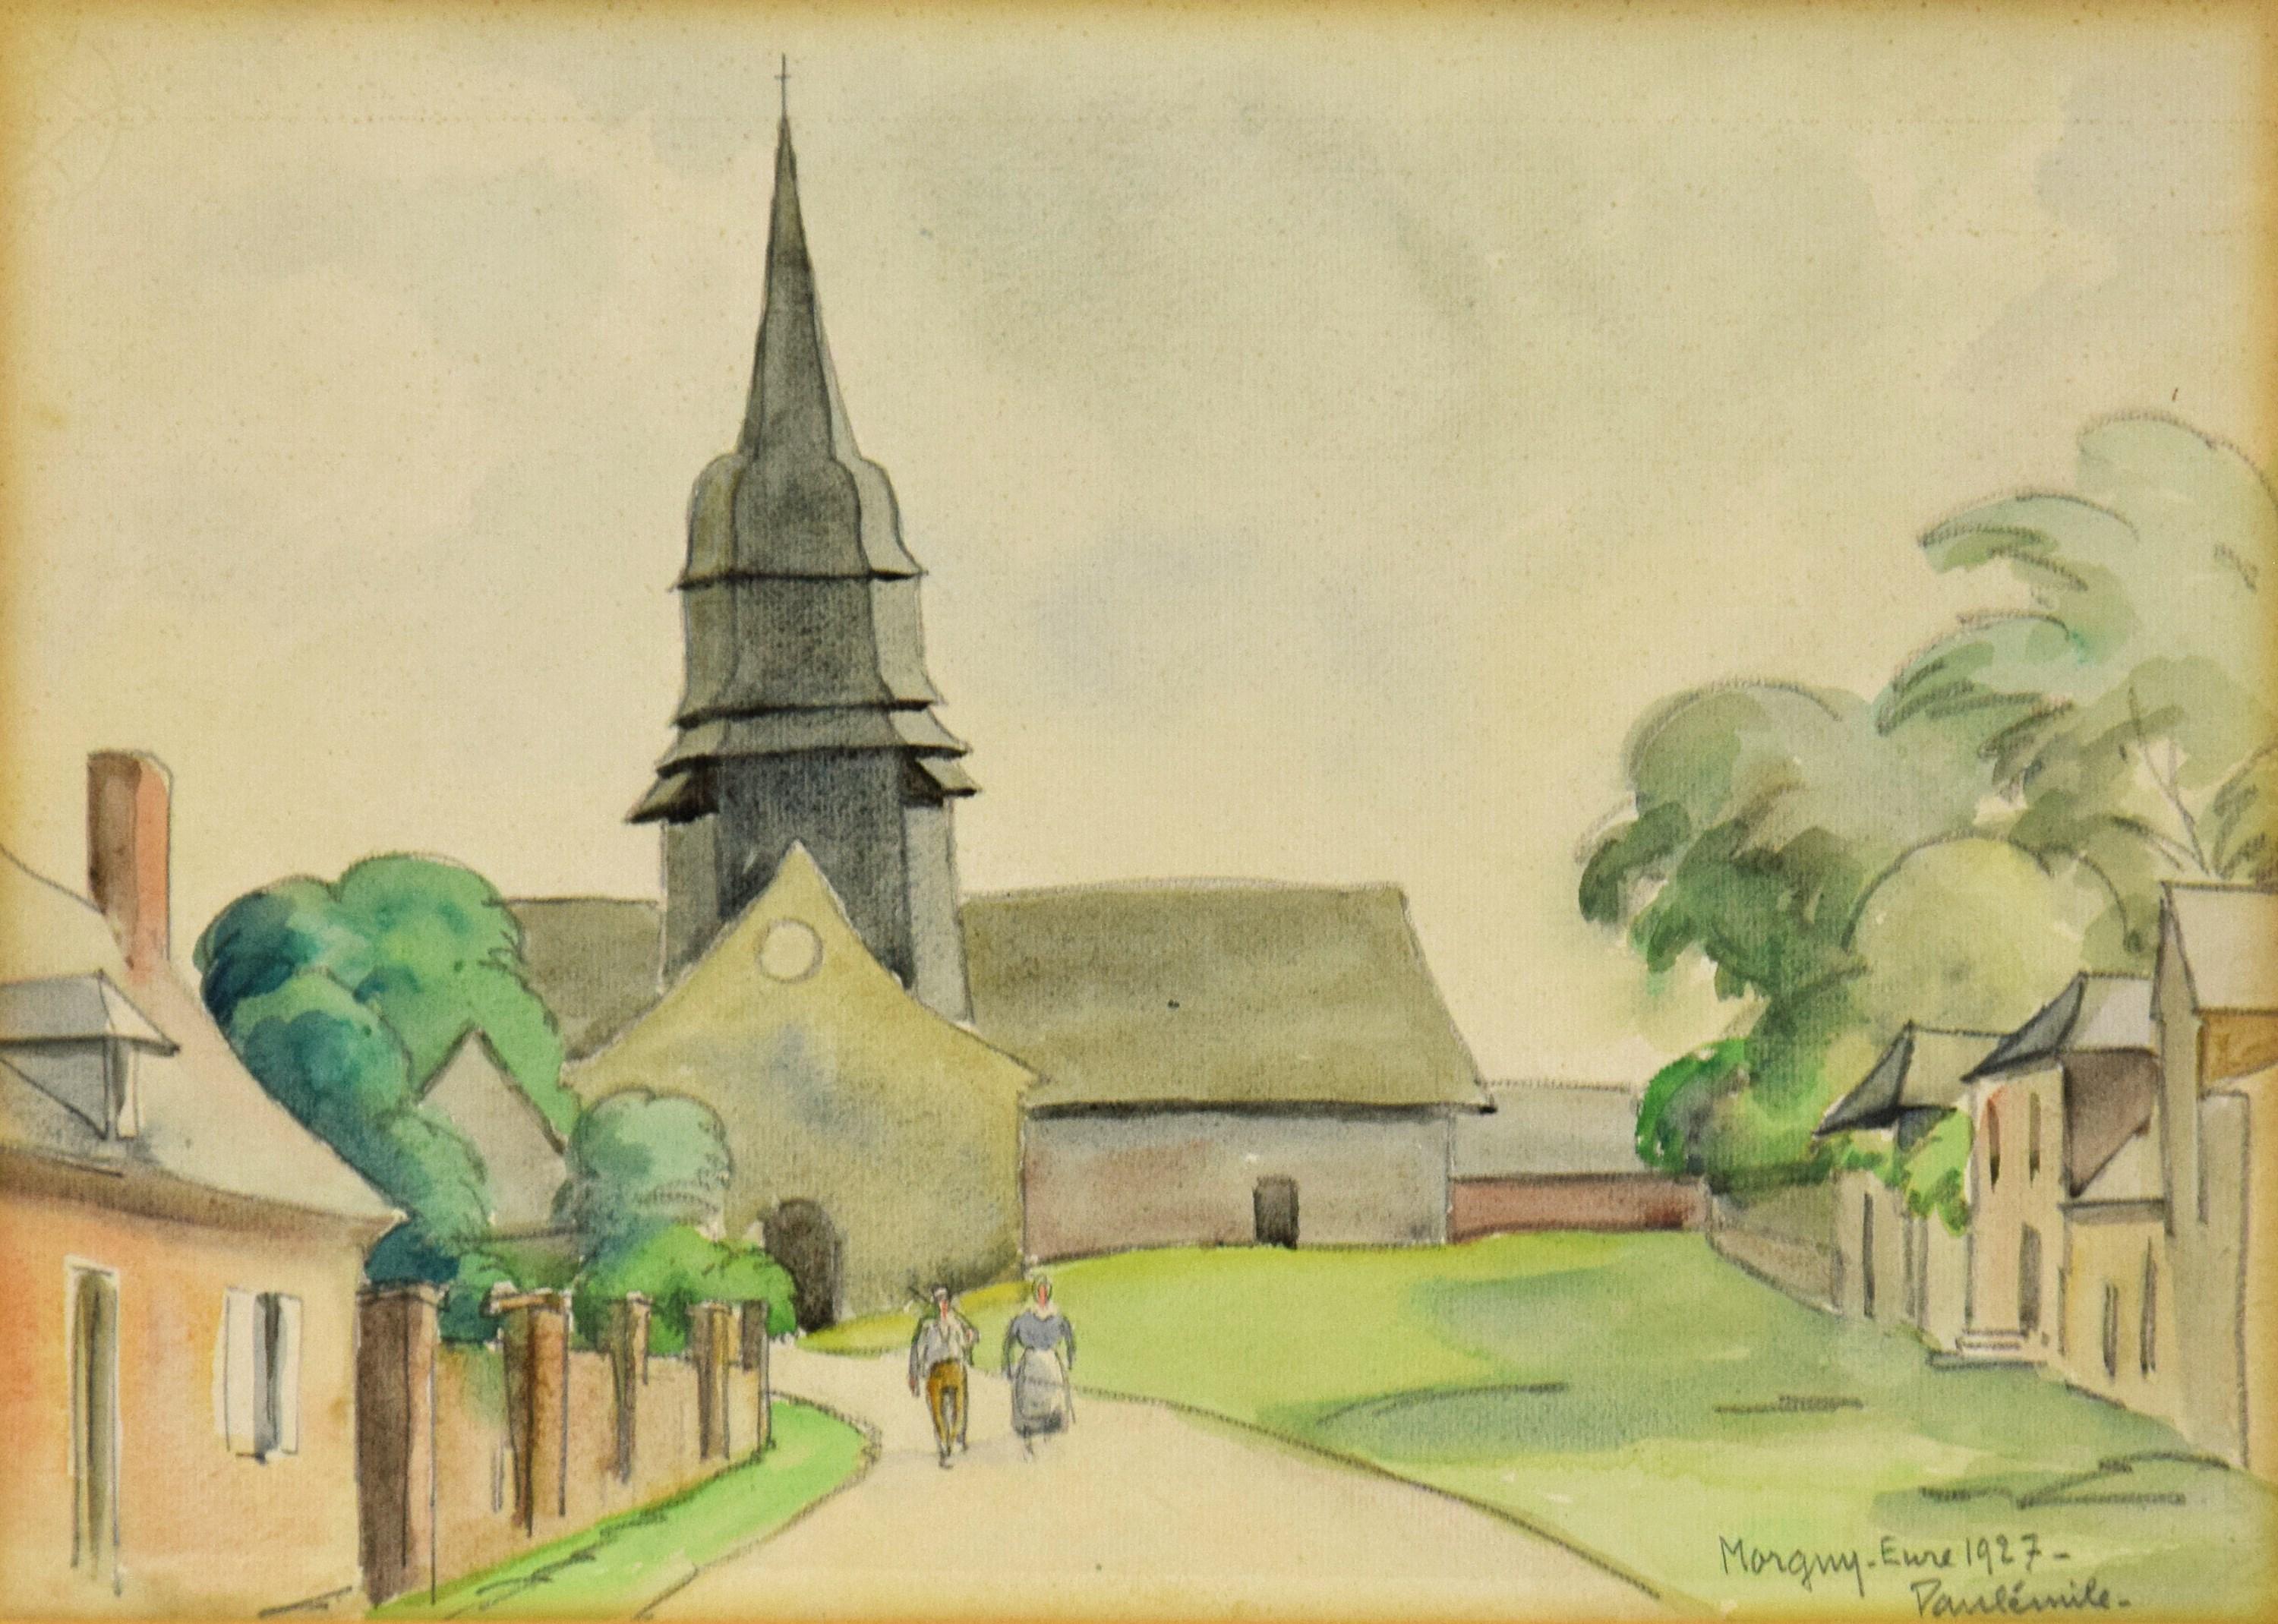 L'Église de Morgny-Eure by Paulémile Pissarro (1884 - 1972)
Watercolour and black crayon on paper
31.5 x 43.5 cm (12 ³/₈ x 17 ¹/₈ inches)
Signed lower right, Paulémile and dated, Morgny-Eure 1927

Provenance
Private Collection, France

This work is